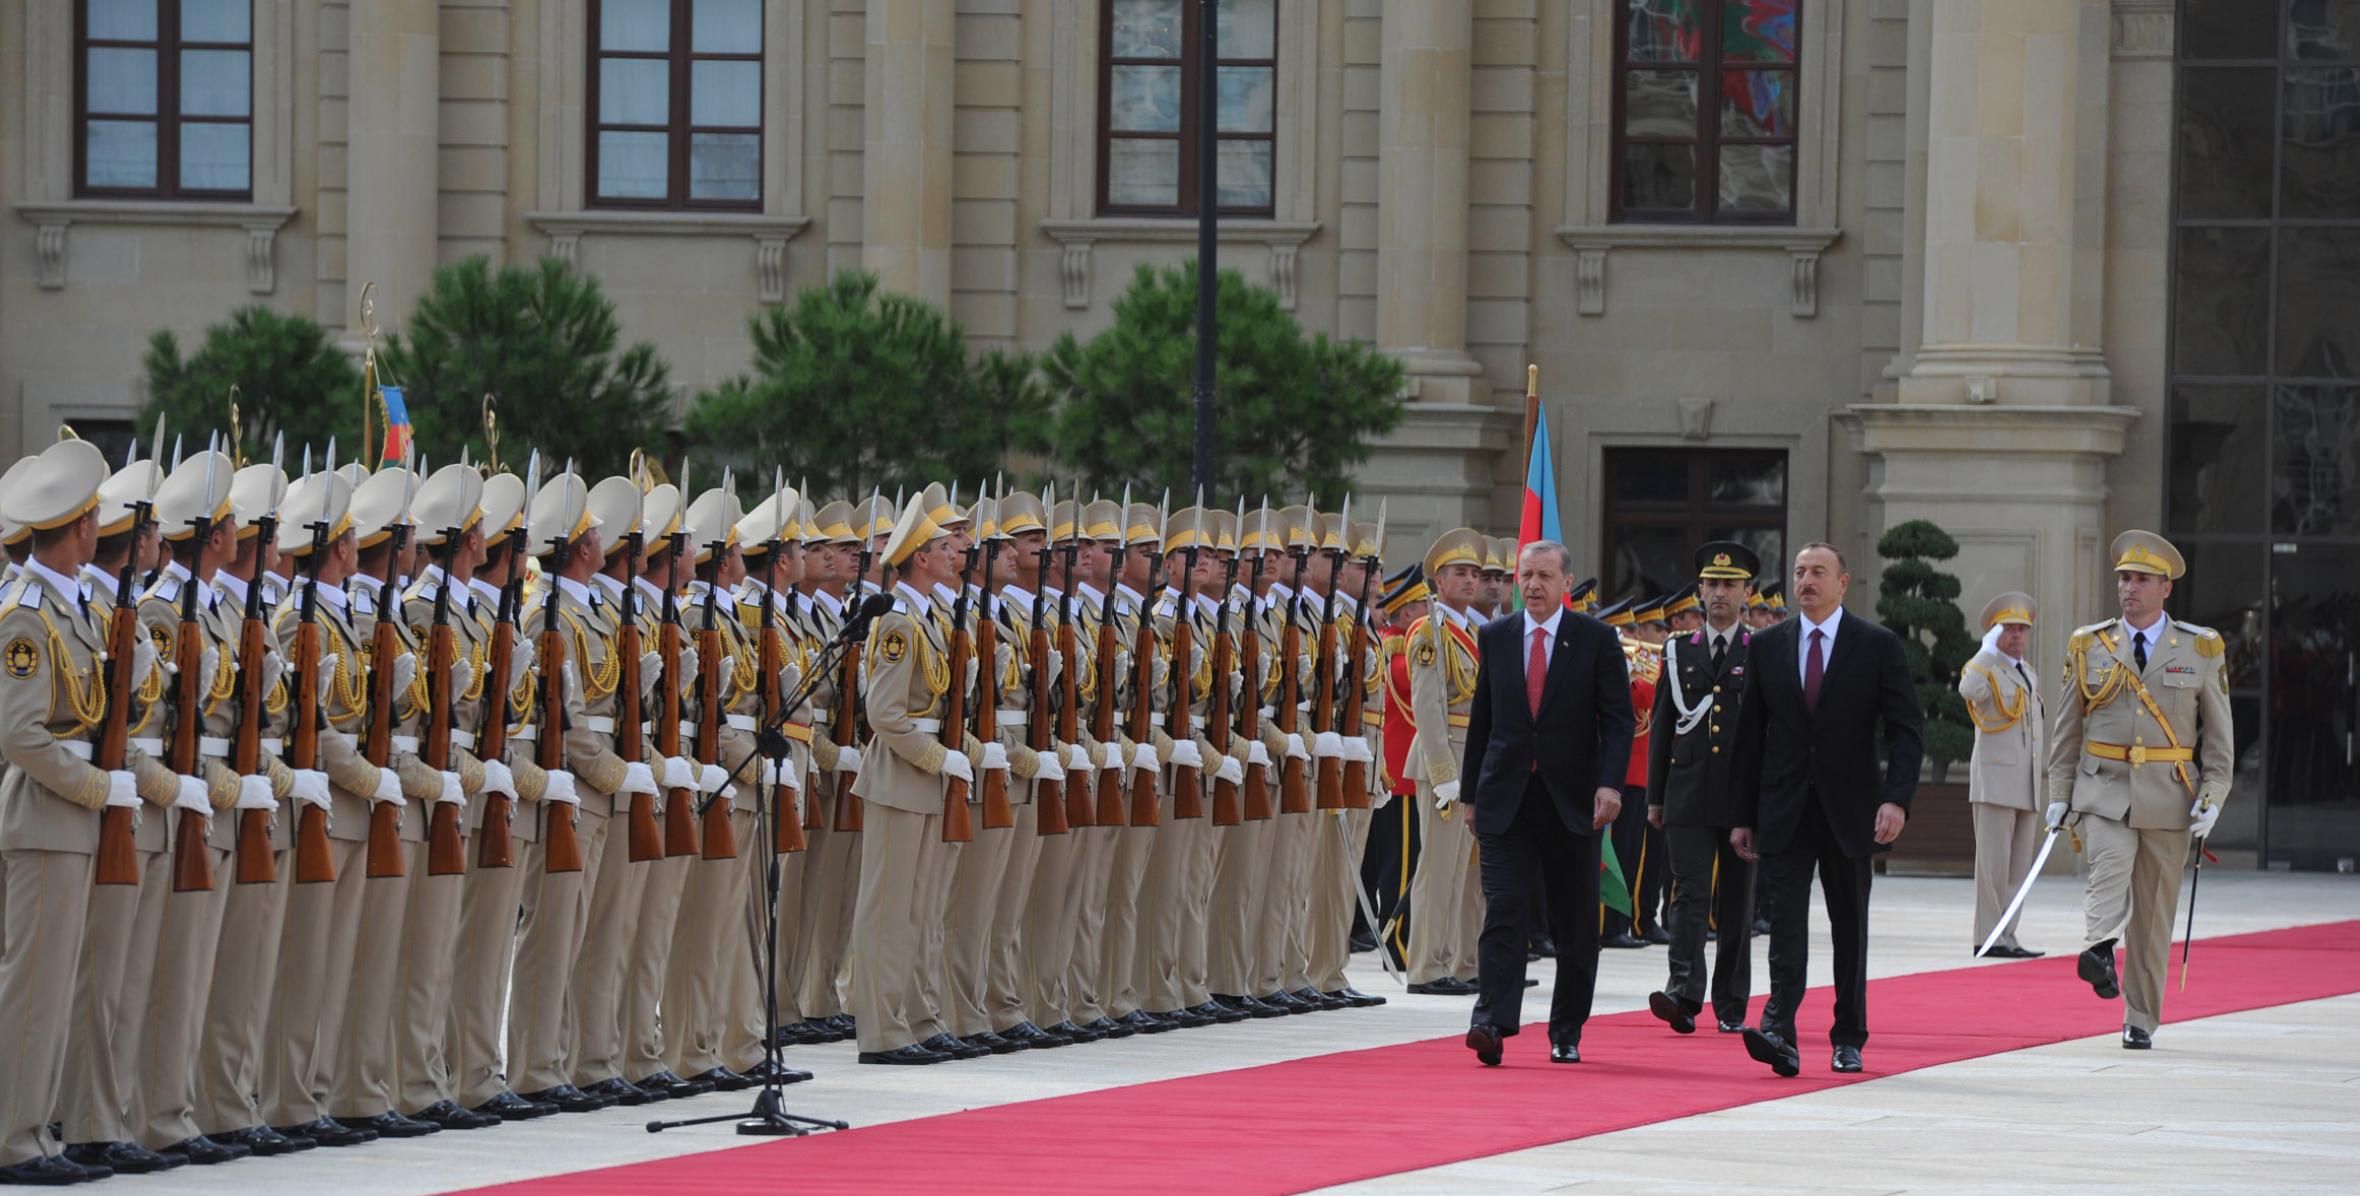 Official welcoming ceremony for President of Turkey Recep Tayyip Erdogan was held